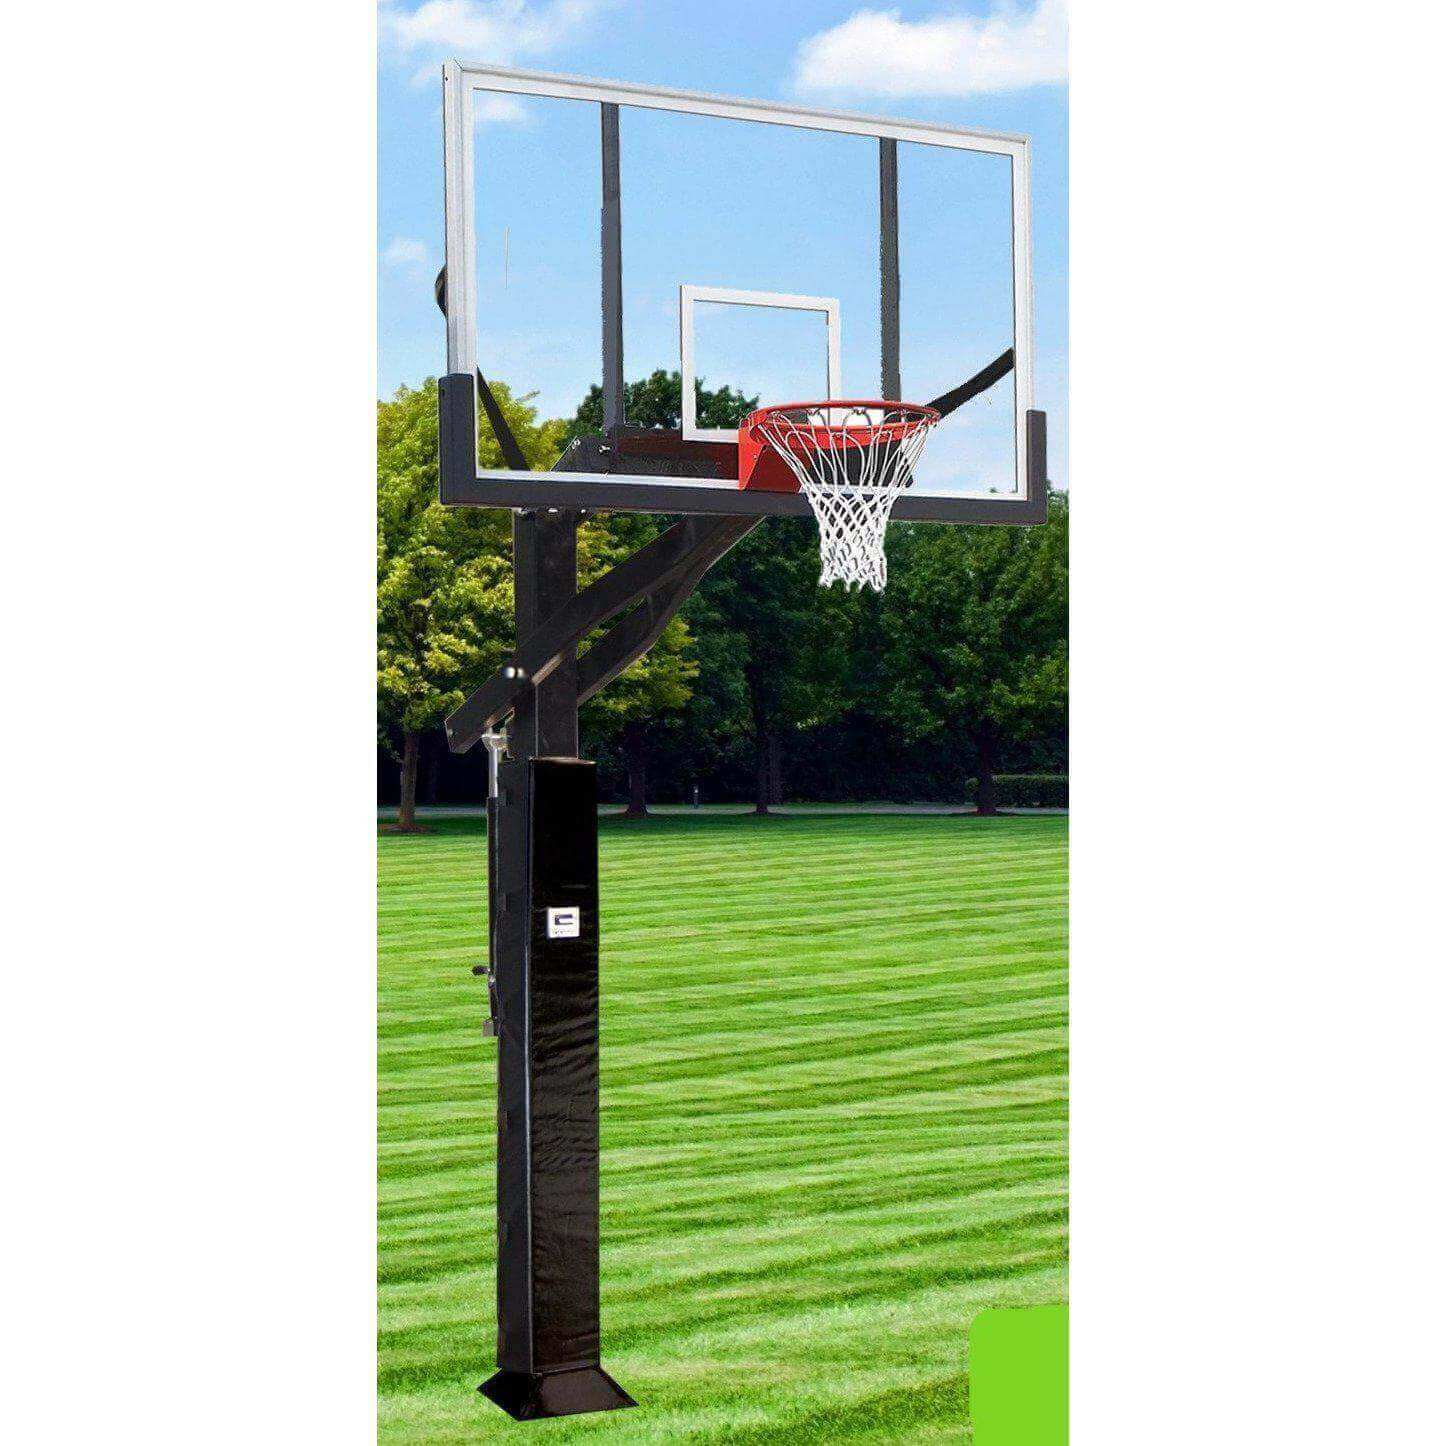 Gared Sports All Pro Jam Adjustable In-Ground Hoops